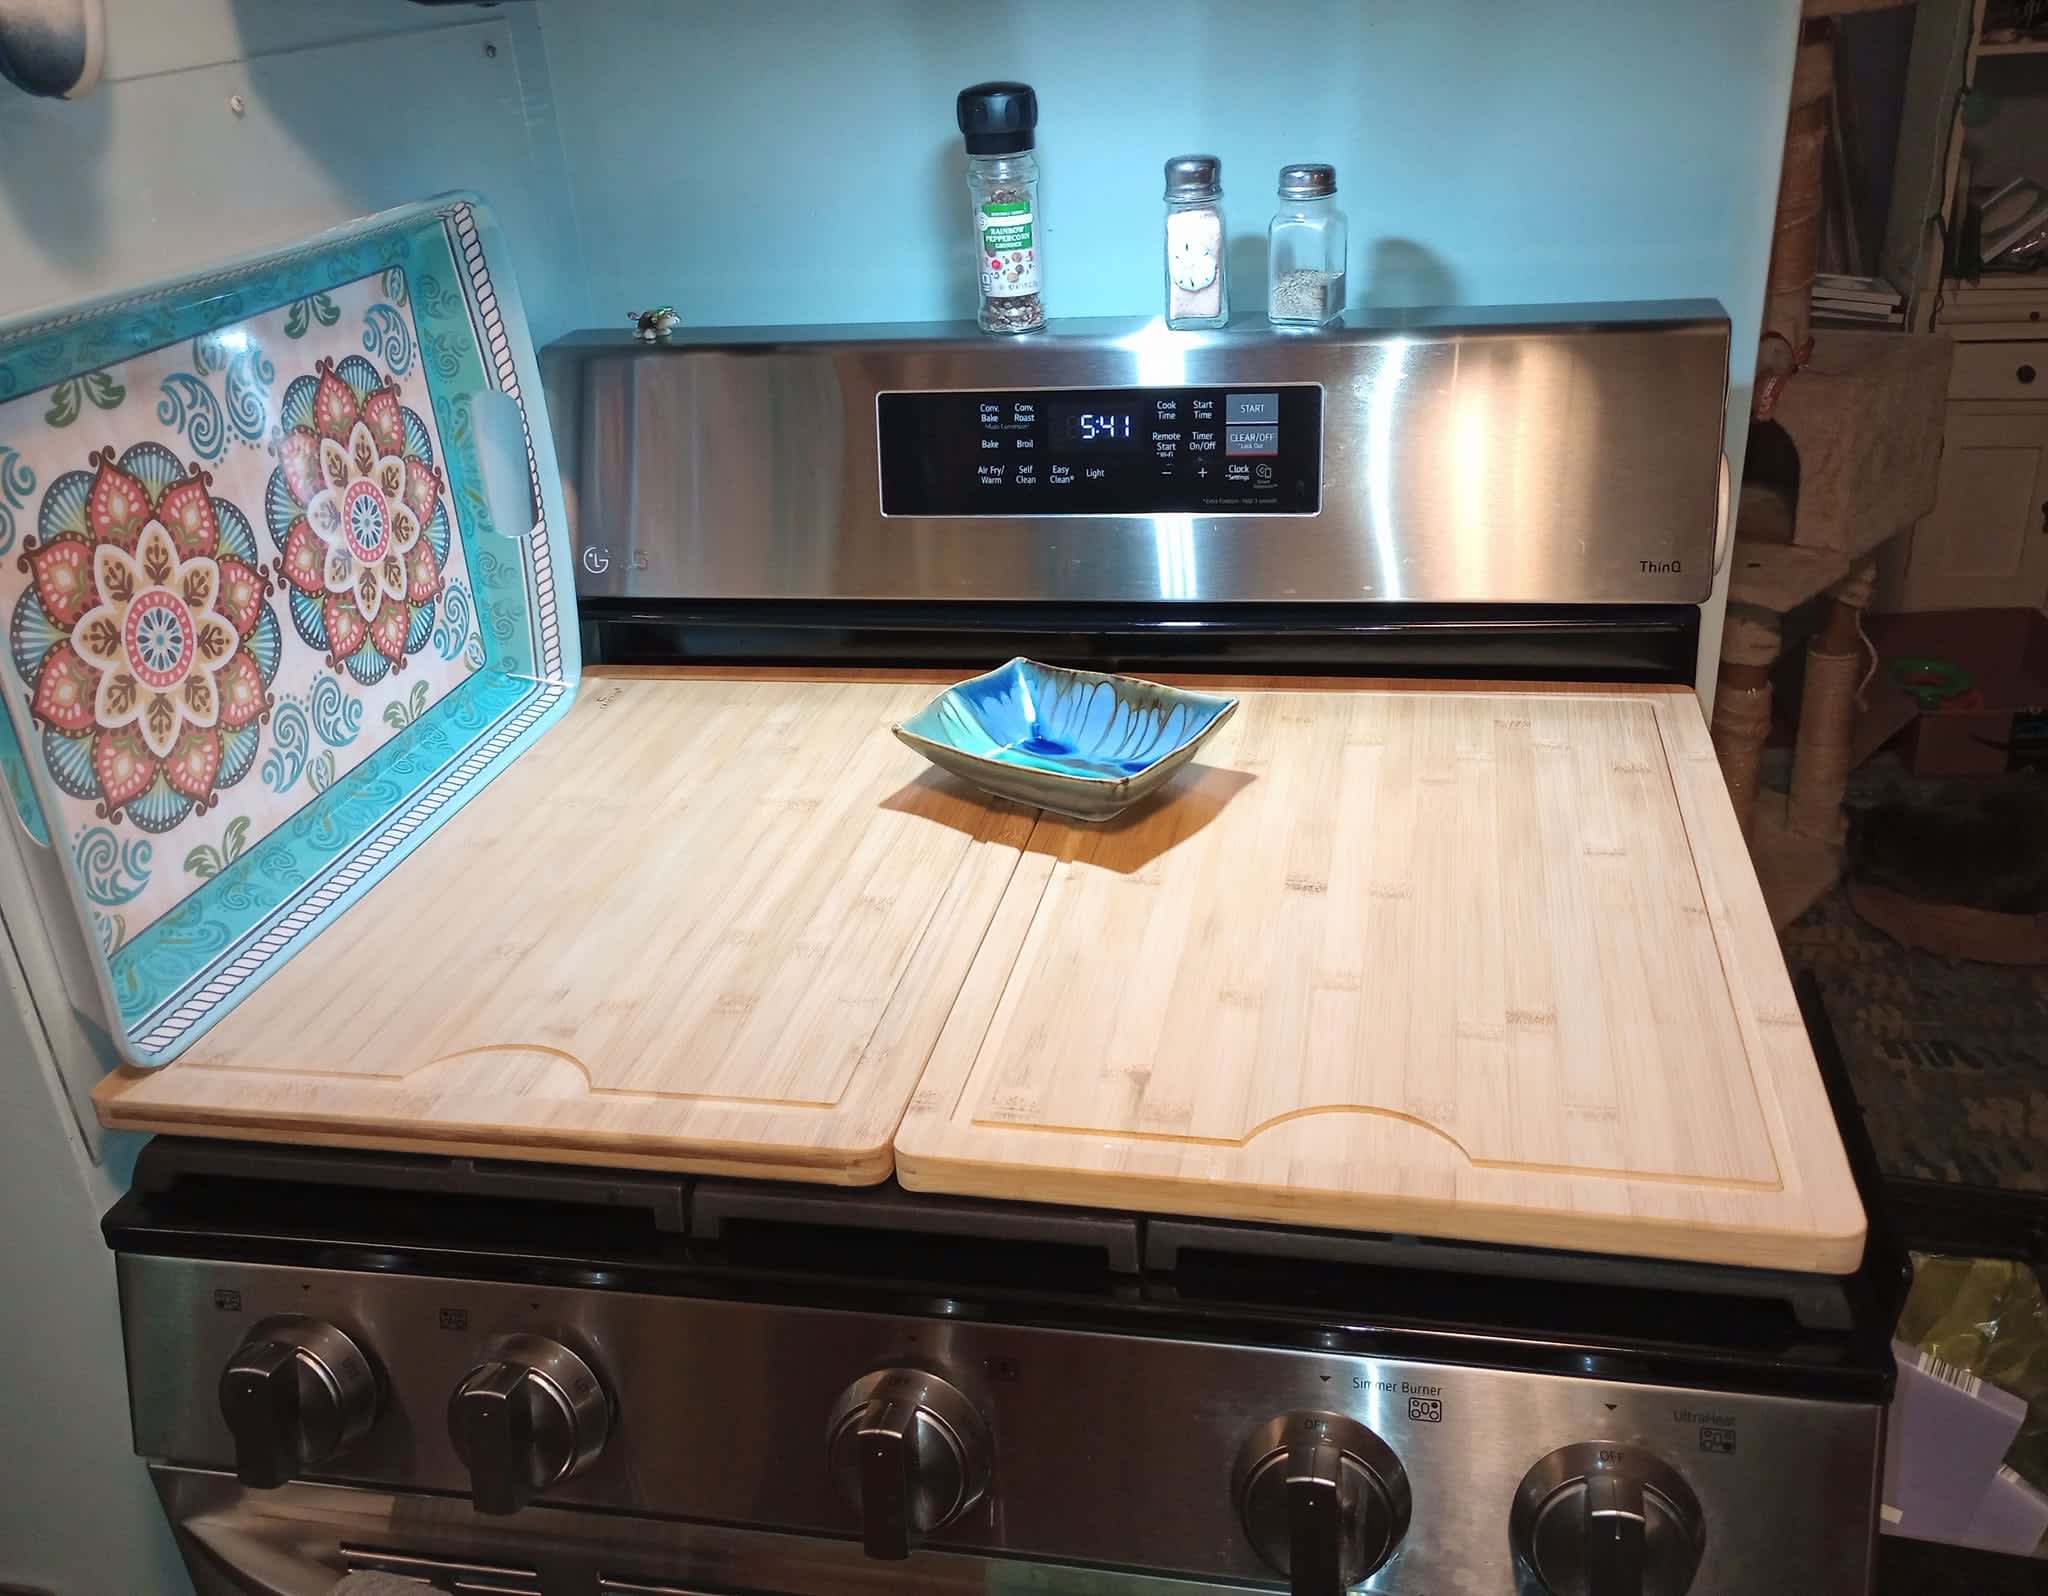  Extra Large Stove Top Cover for Gas Stove & Electric Stove,  Wooden Stovetop Cover Cutting Board for Counter Space, Stove Burner Covers, Sink  Cover, Stove Top Cover, 30 In Bamboo